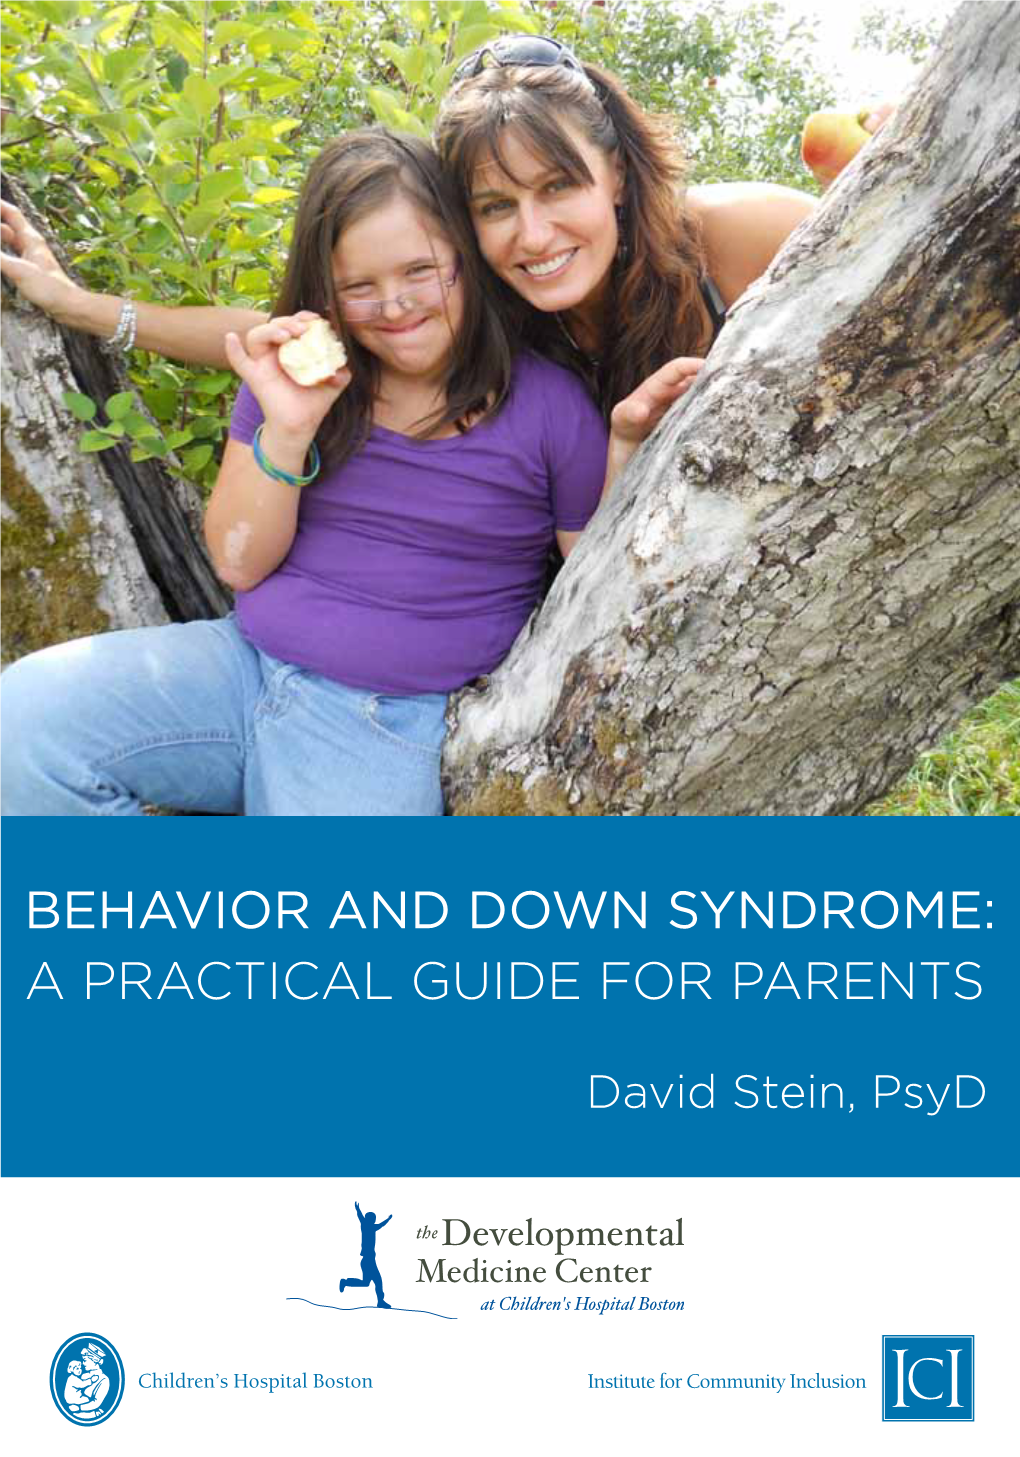 Behavior and Down Syndrome: a Practical Guide for Parents